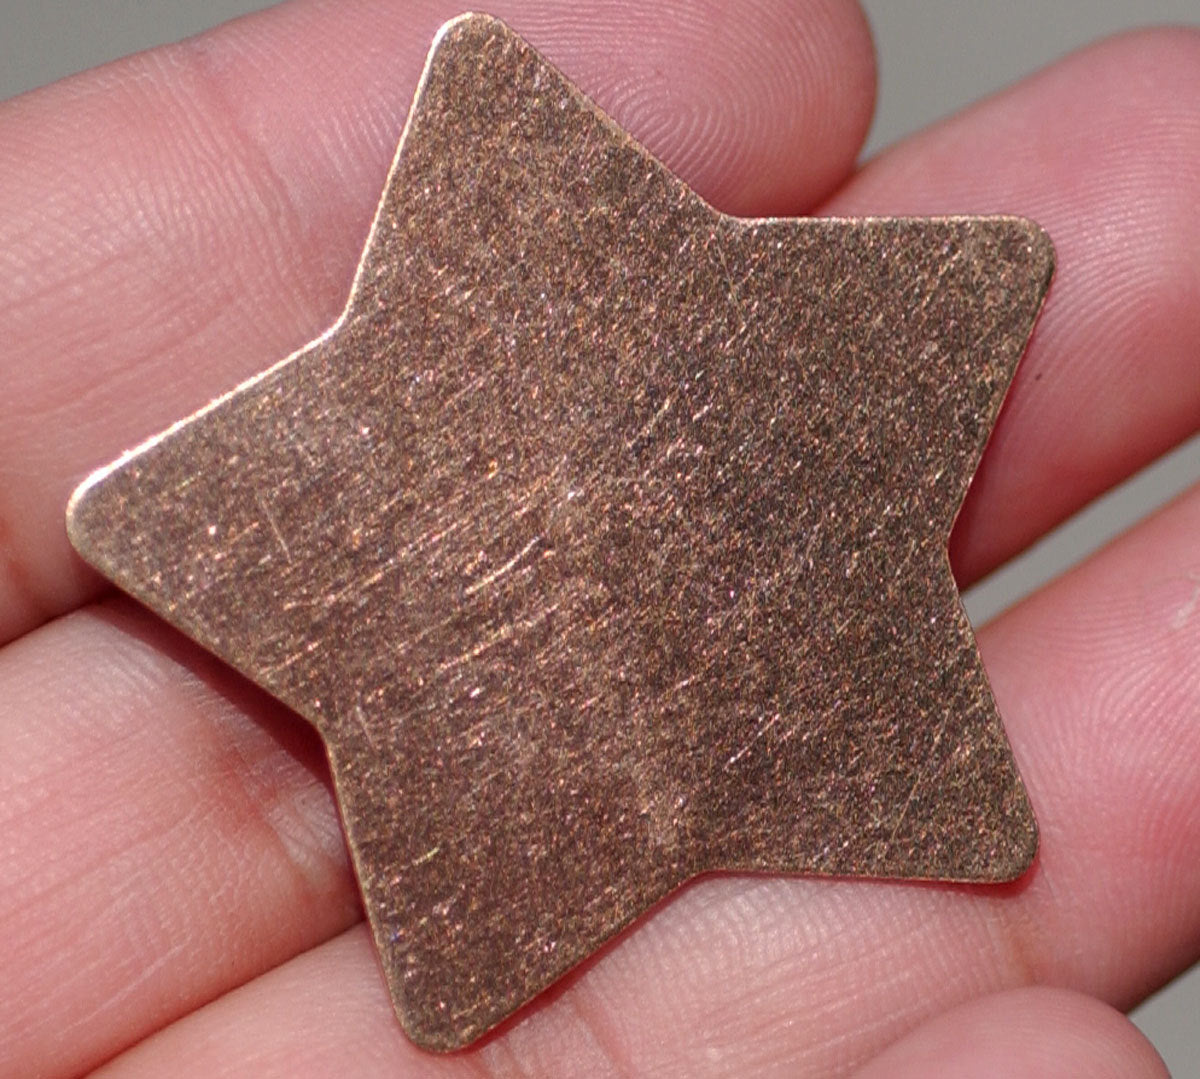 Copper Star Blank 24g 36mm for Enameling Stamping Texturing Soldering Pendant Jewelry Making